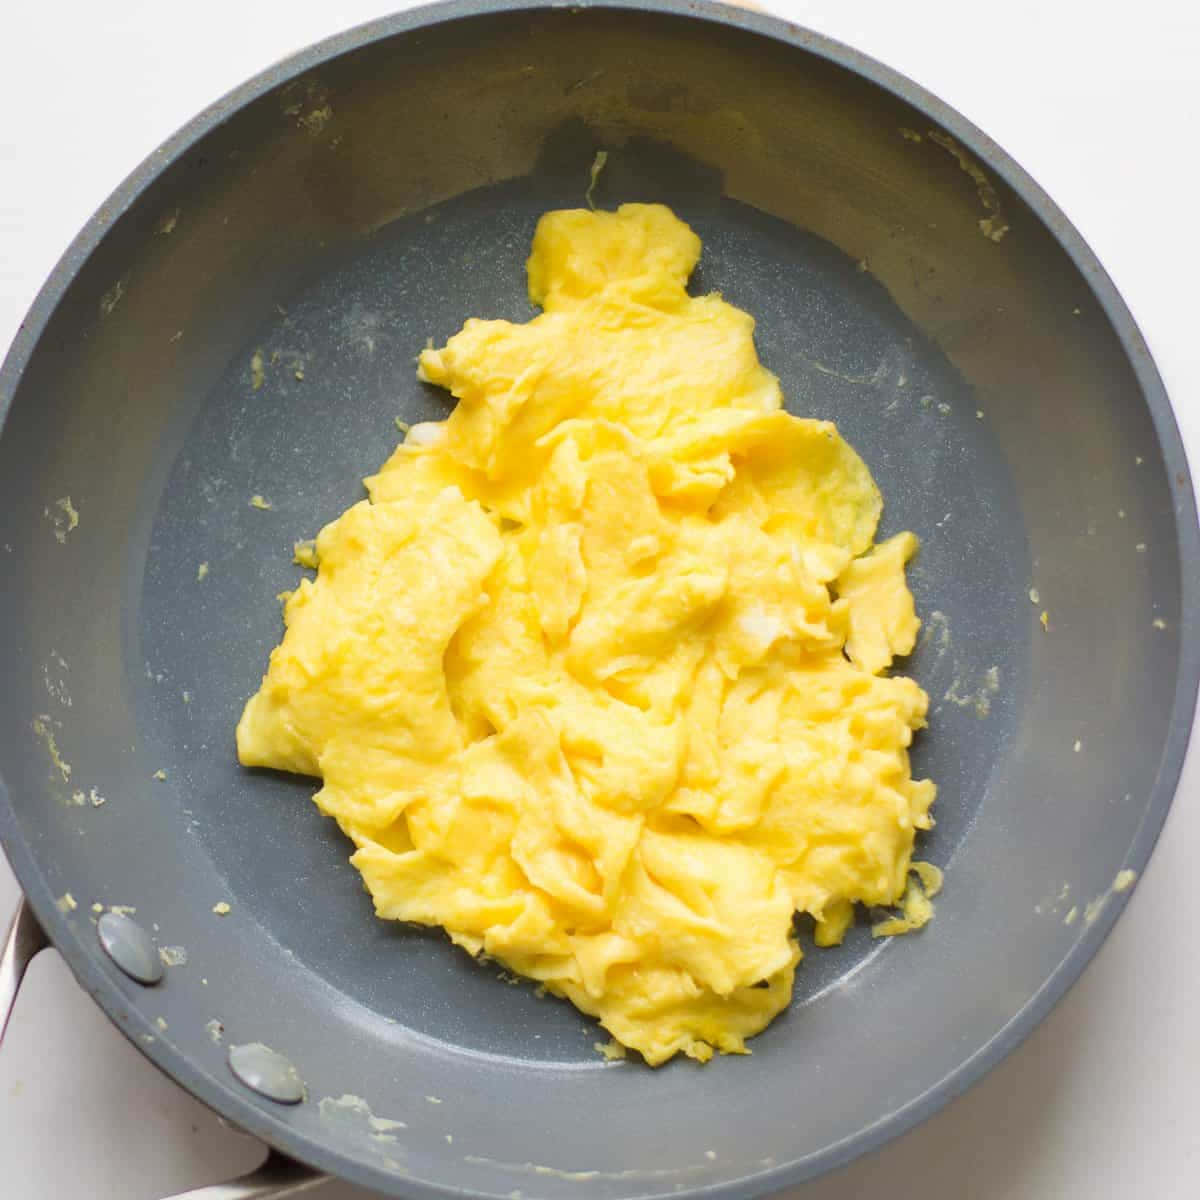 Dig in and Enjoy this Delicious Scrambled Egg